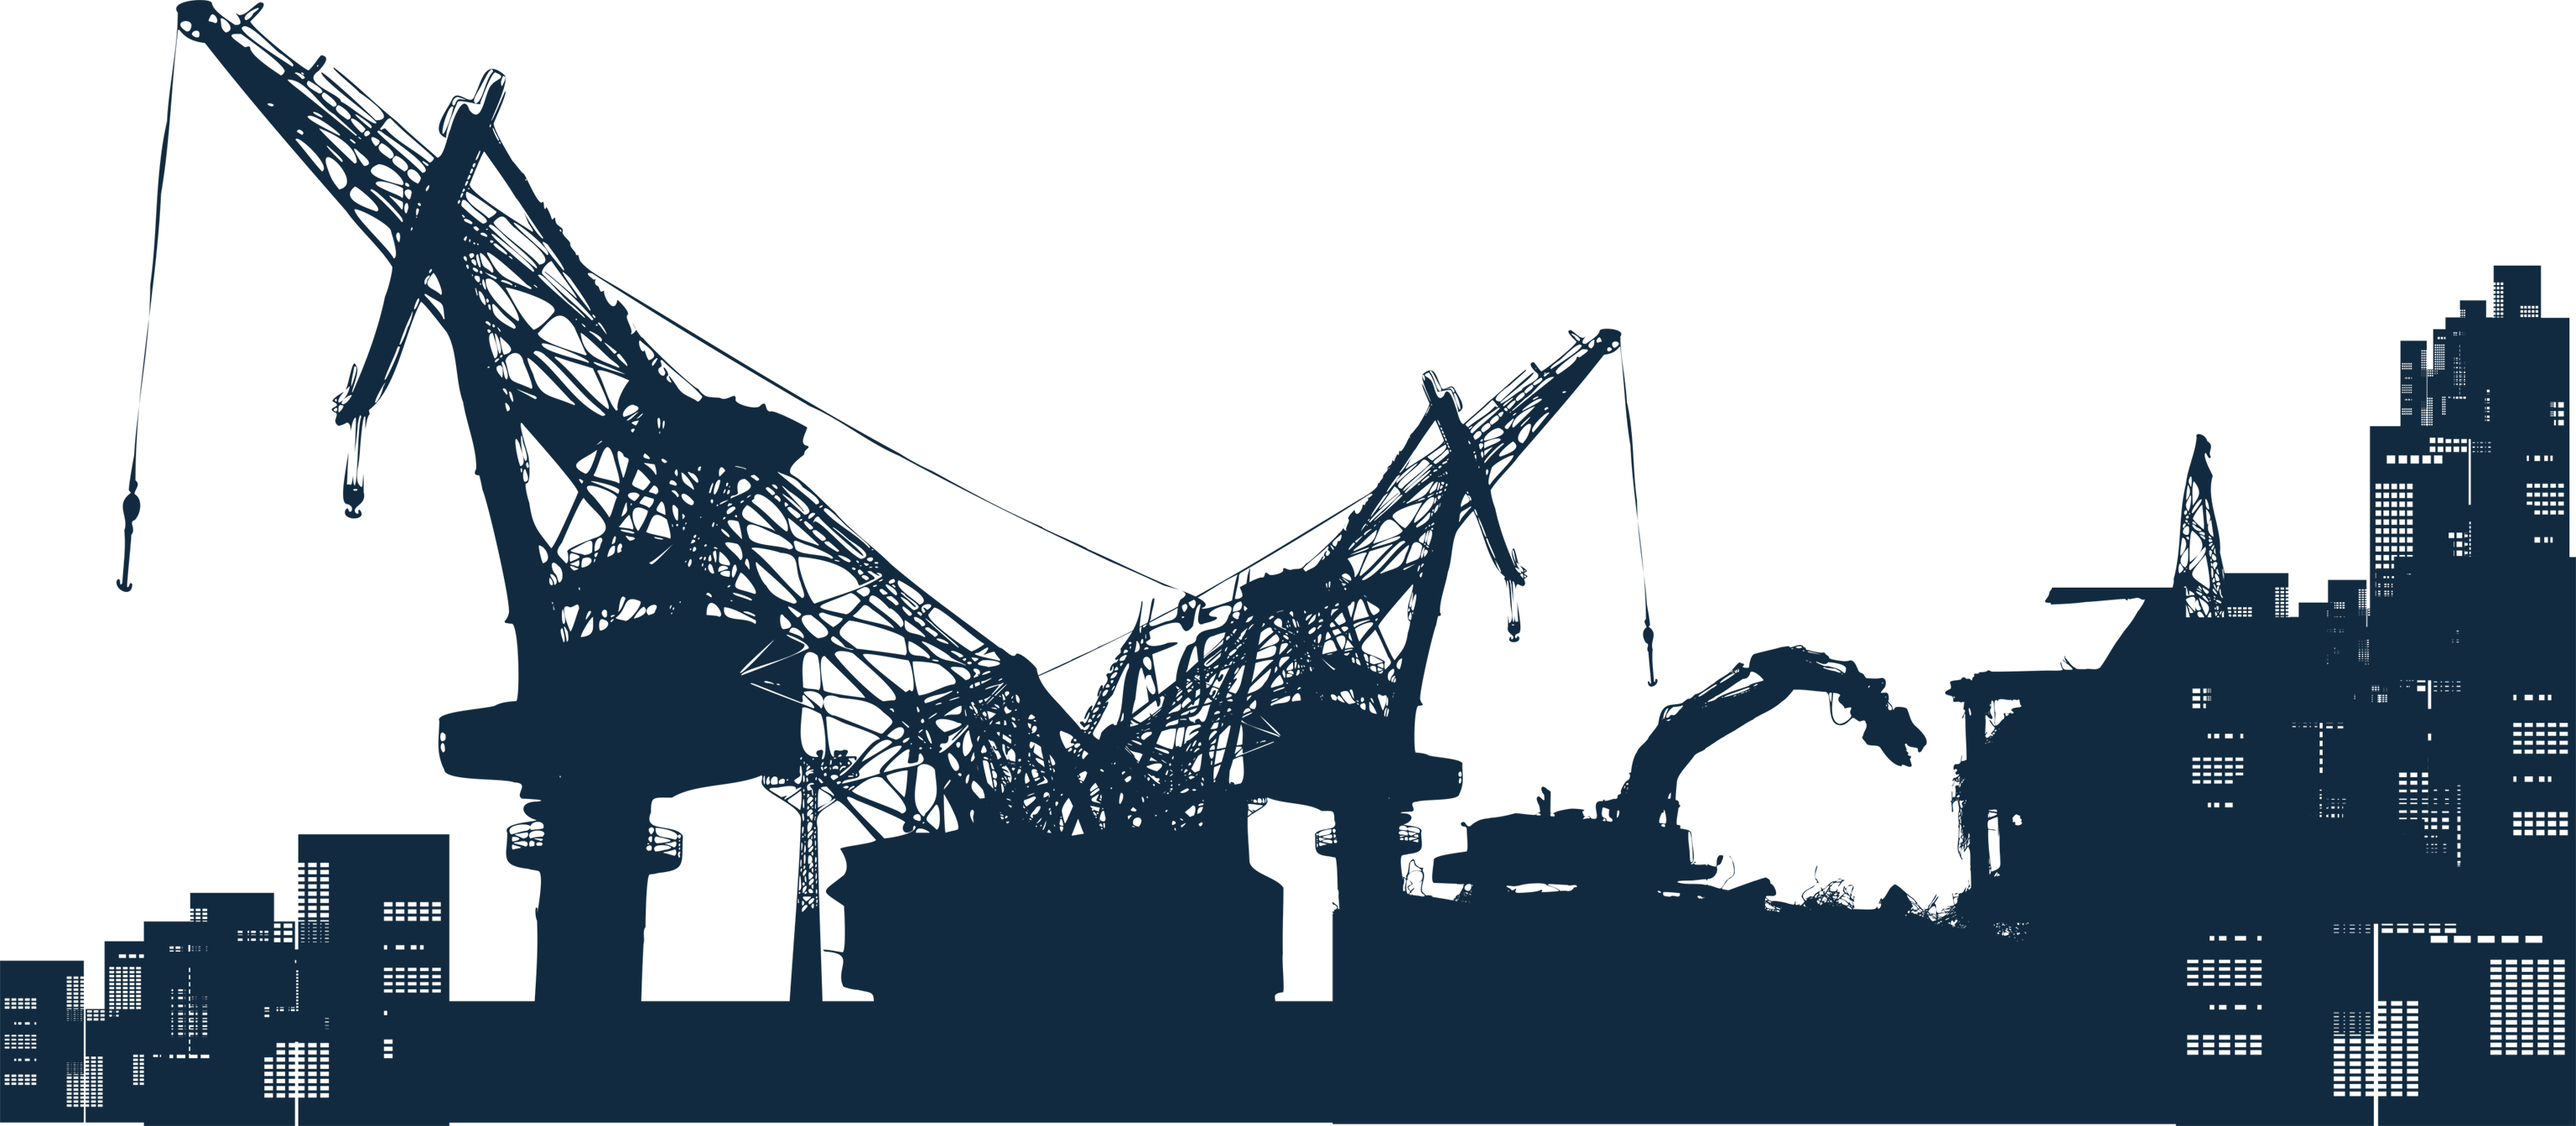 Heavy City Silhouette Construction Site Equipment Engineering Clipart